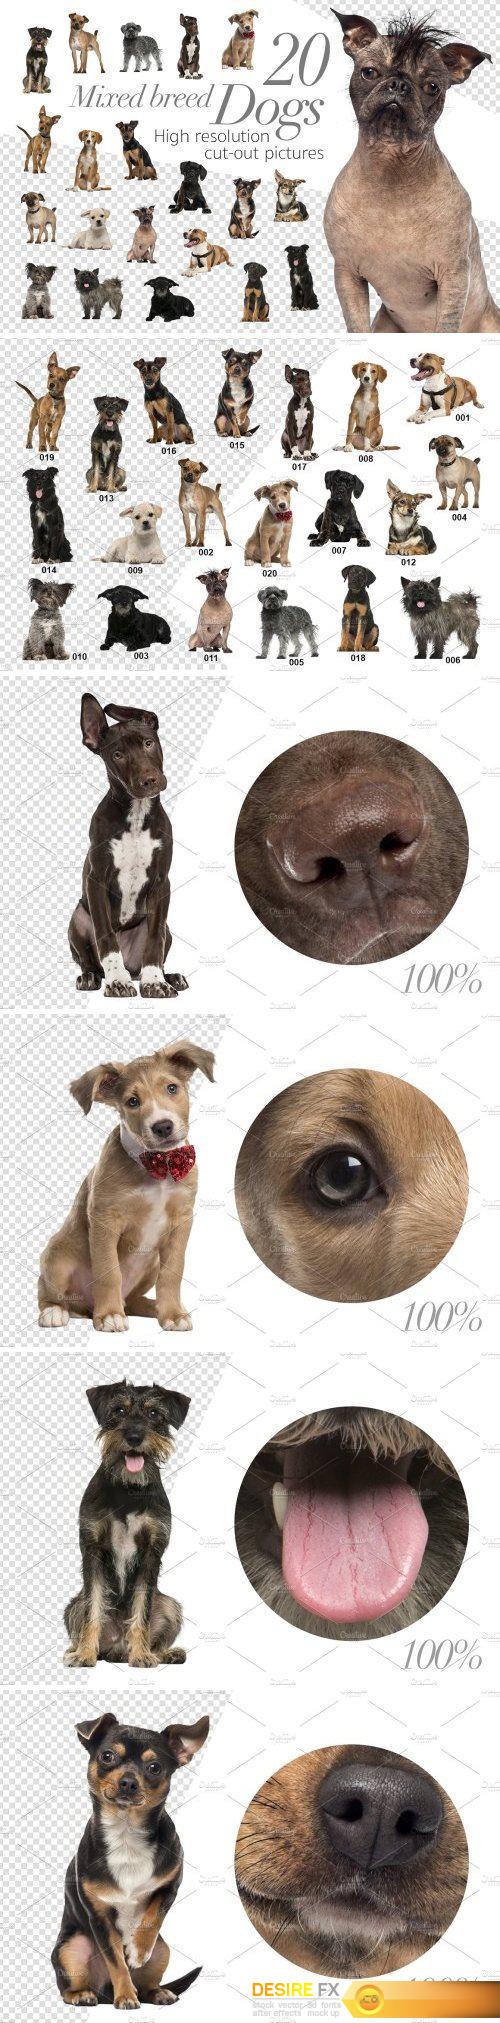 CM - 20 Mixed breed Dogs - Cut-out Pics 2029733